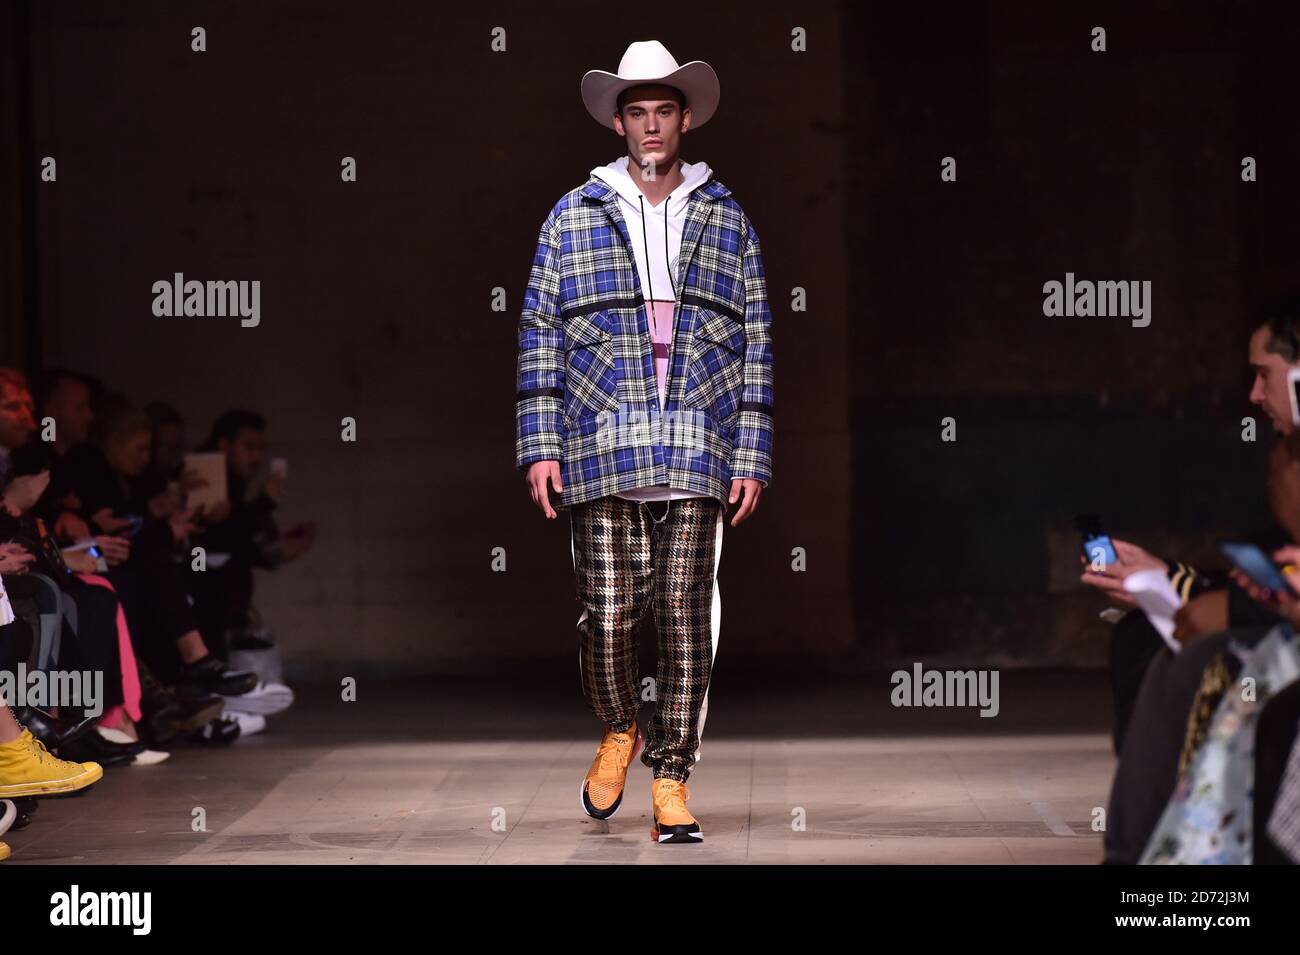 Models on the catwalk during the Astrid Andersen London Fashion Week Men's AW18 show, held at the Old Selfridge's Hotel, London. Picture date: Sunday January 7th, 2018. Photo credit should read: Matt Crossick/ EMPICS Entertainment. Stock Photo